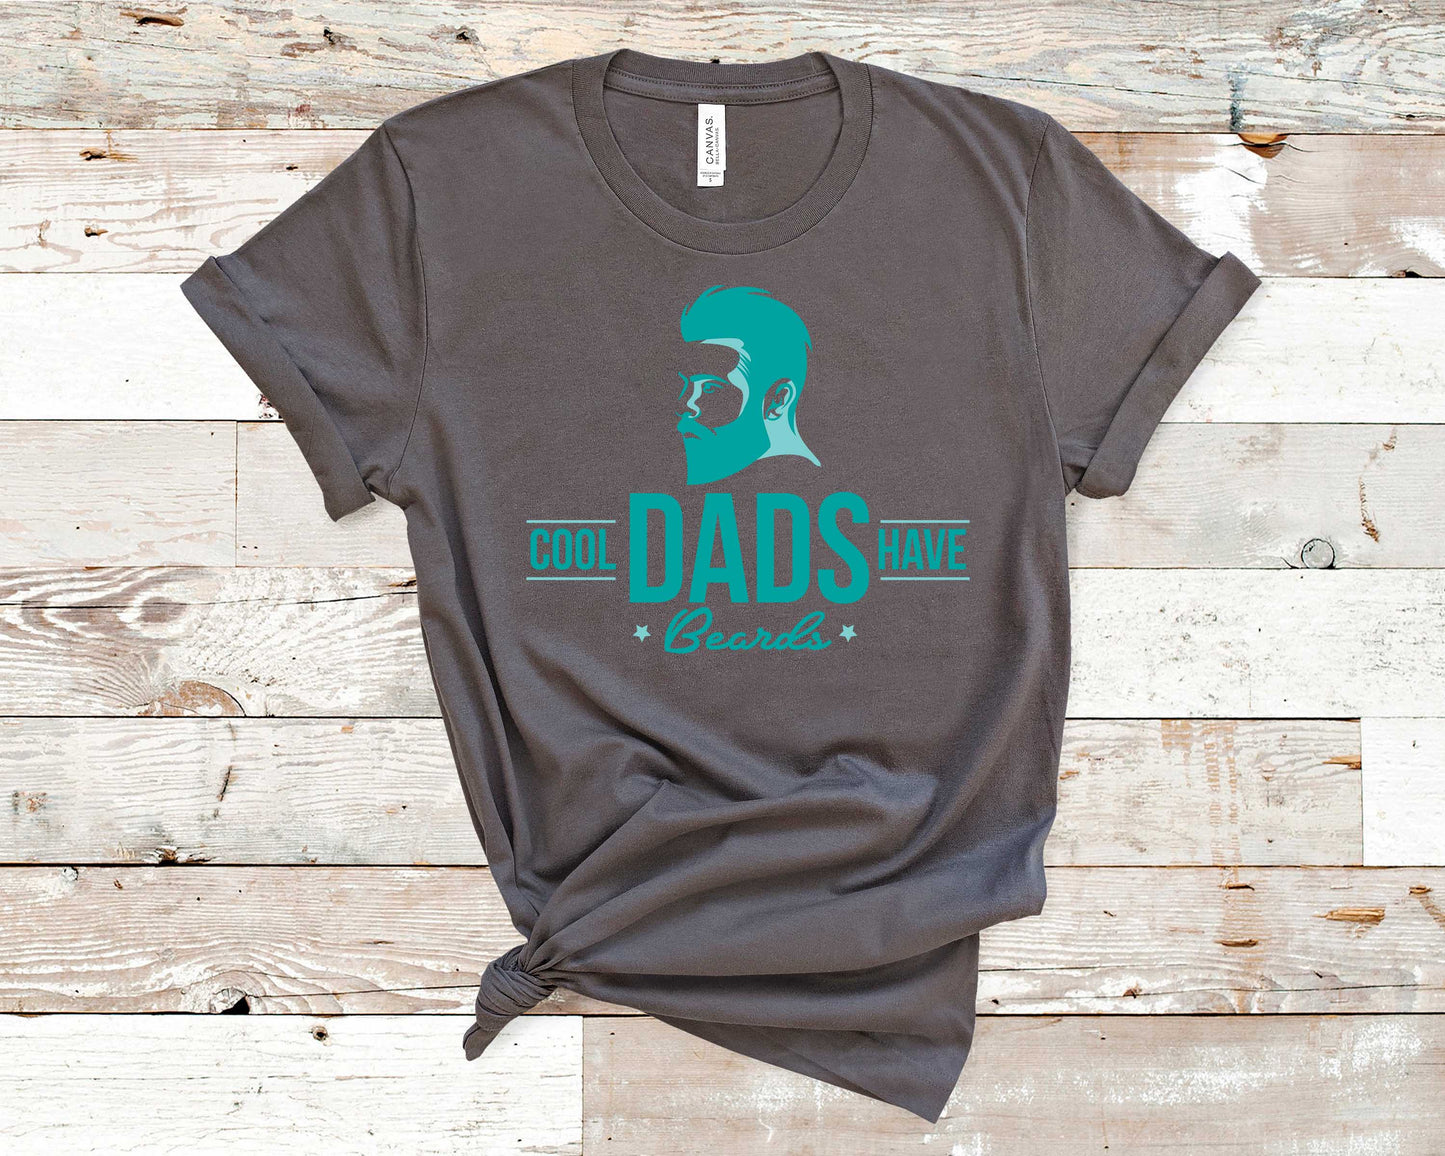 Cool Dads Have Beards - Father's Day